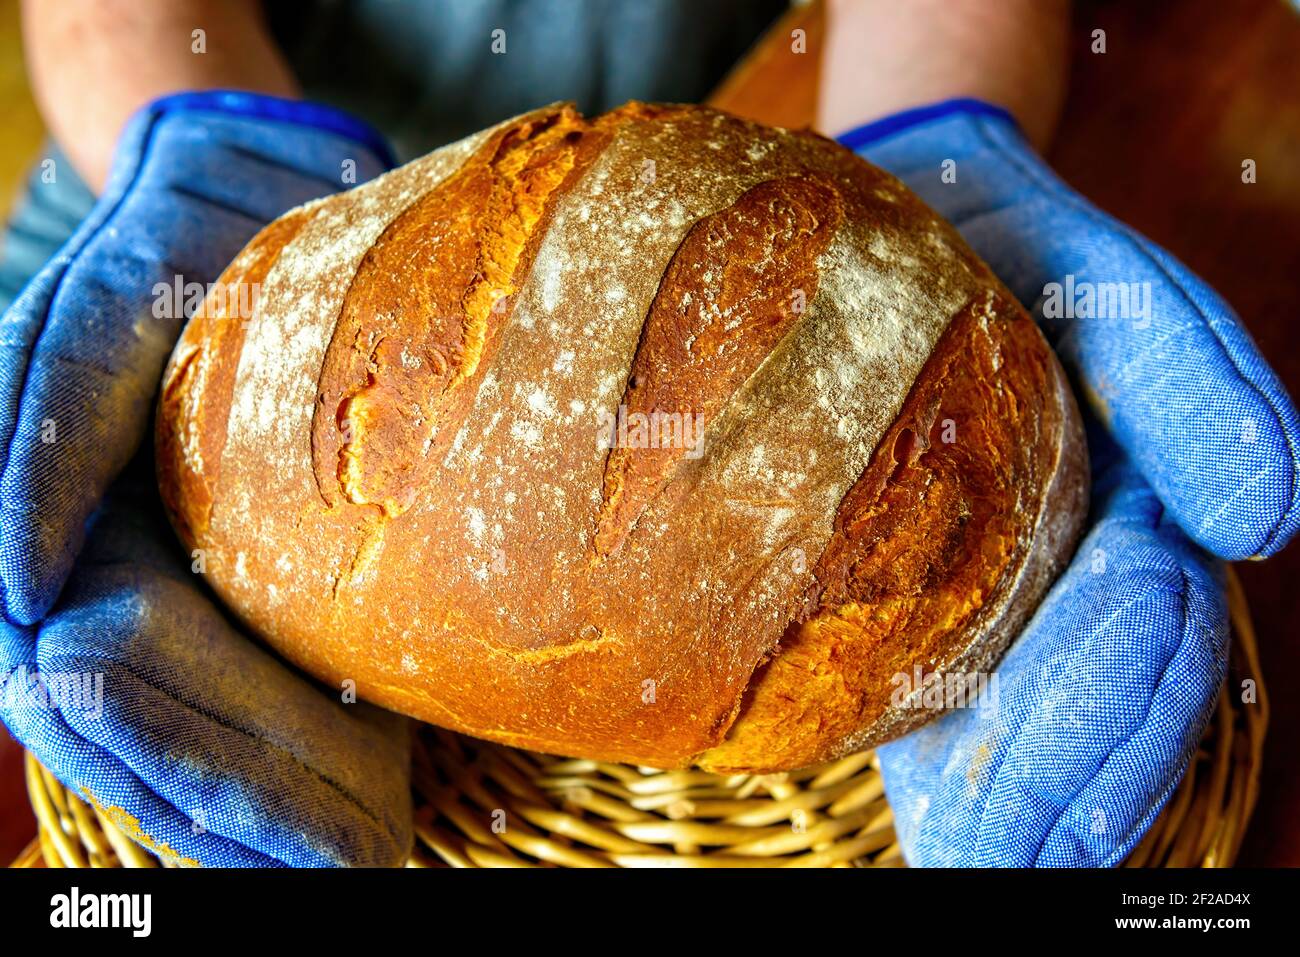 Traditional wheat and rye bread baked at home holden in hands in protective  oven mitts Stock Photo - Alamy